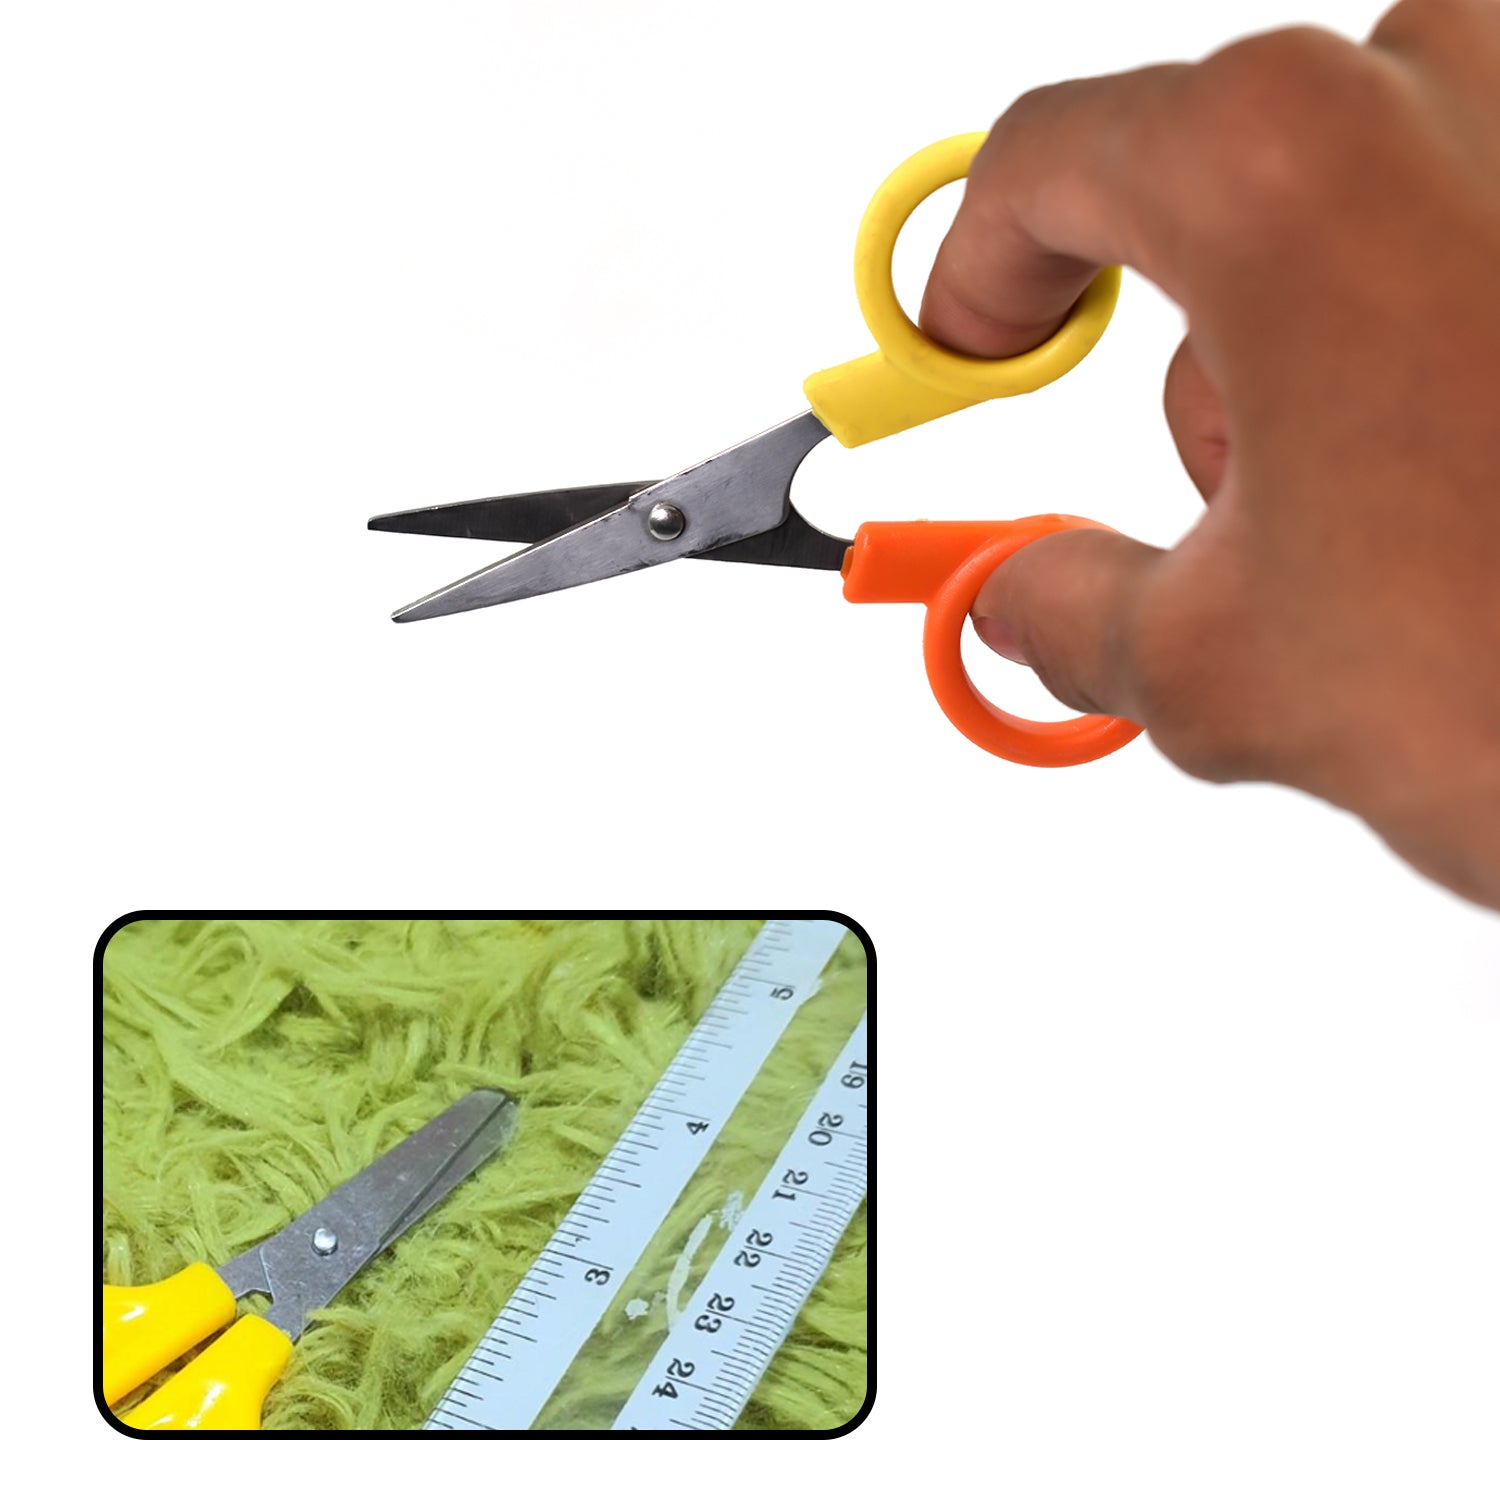 7623 cn Scissor For Cutting And Designing Purposes For Students And All Etc. DeoDap